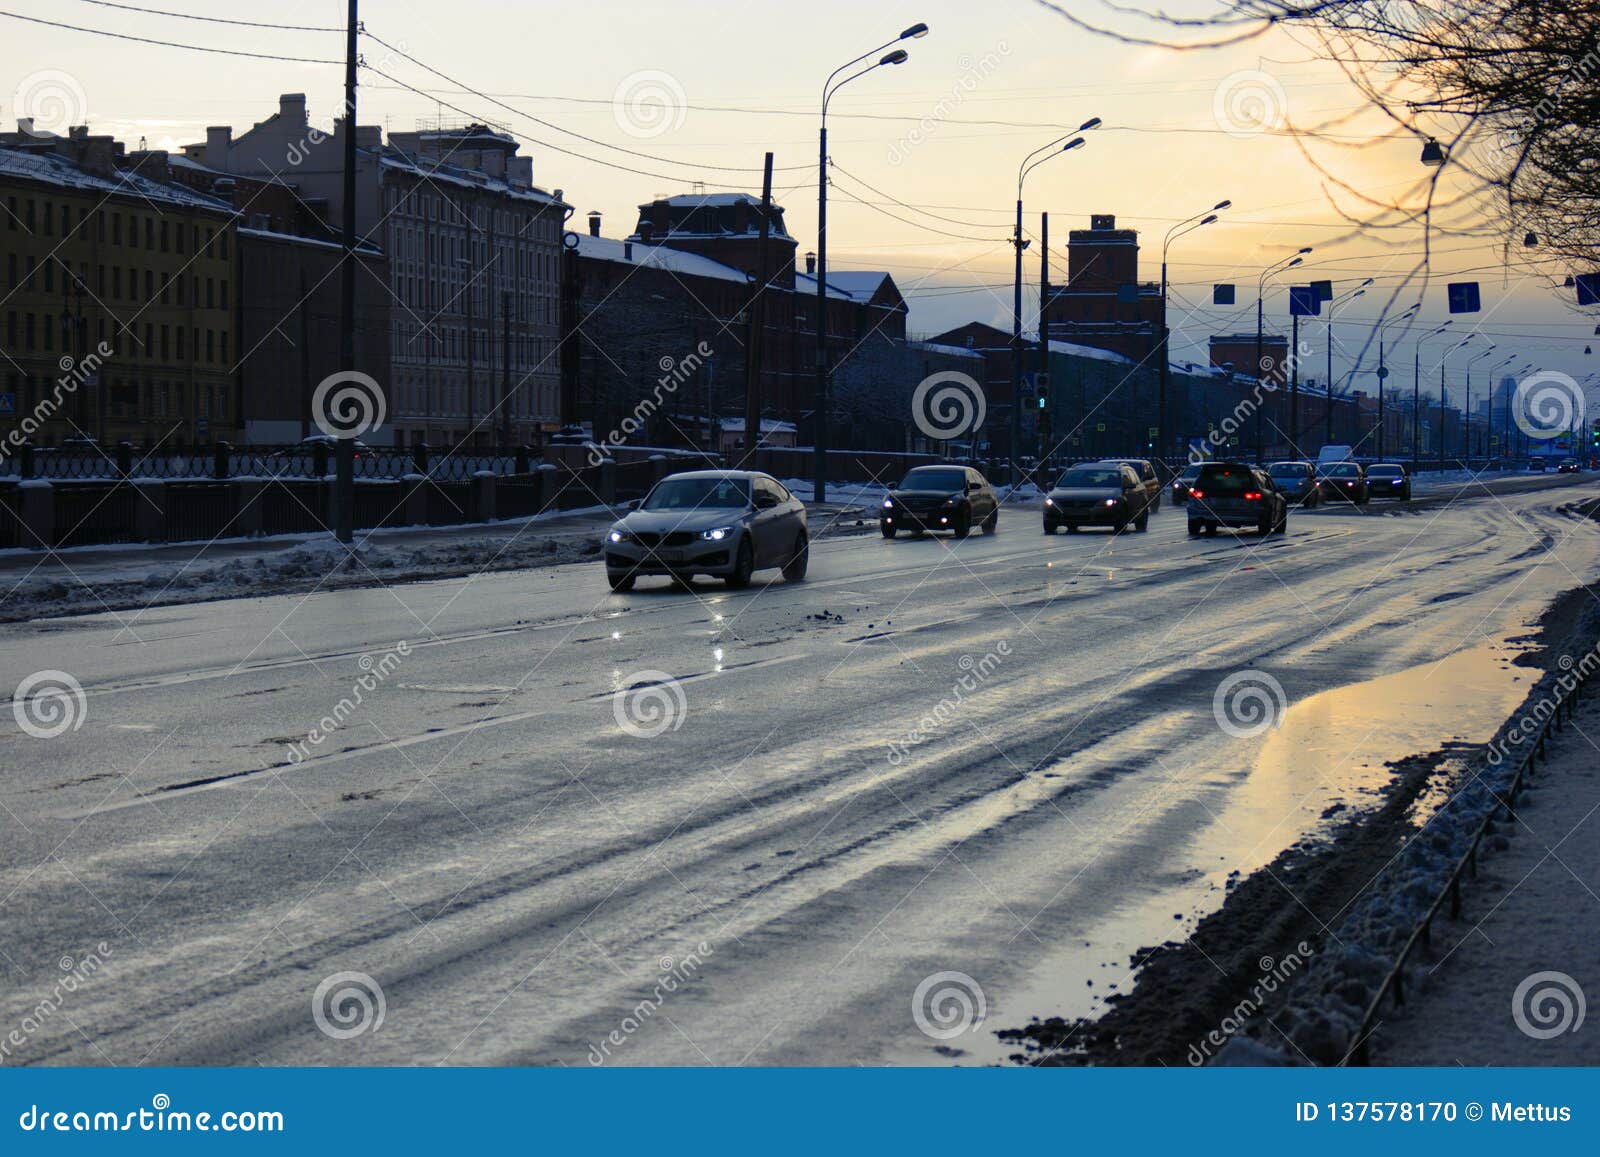 Saint Petersburg Russia 27 Feb 2016 Dirty Road In The Winter Sunset Time In St Petersburg Russia Editorial Image Image Of Removal Neighborhood 137578170